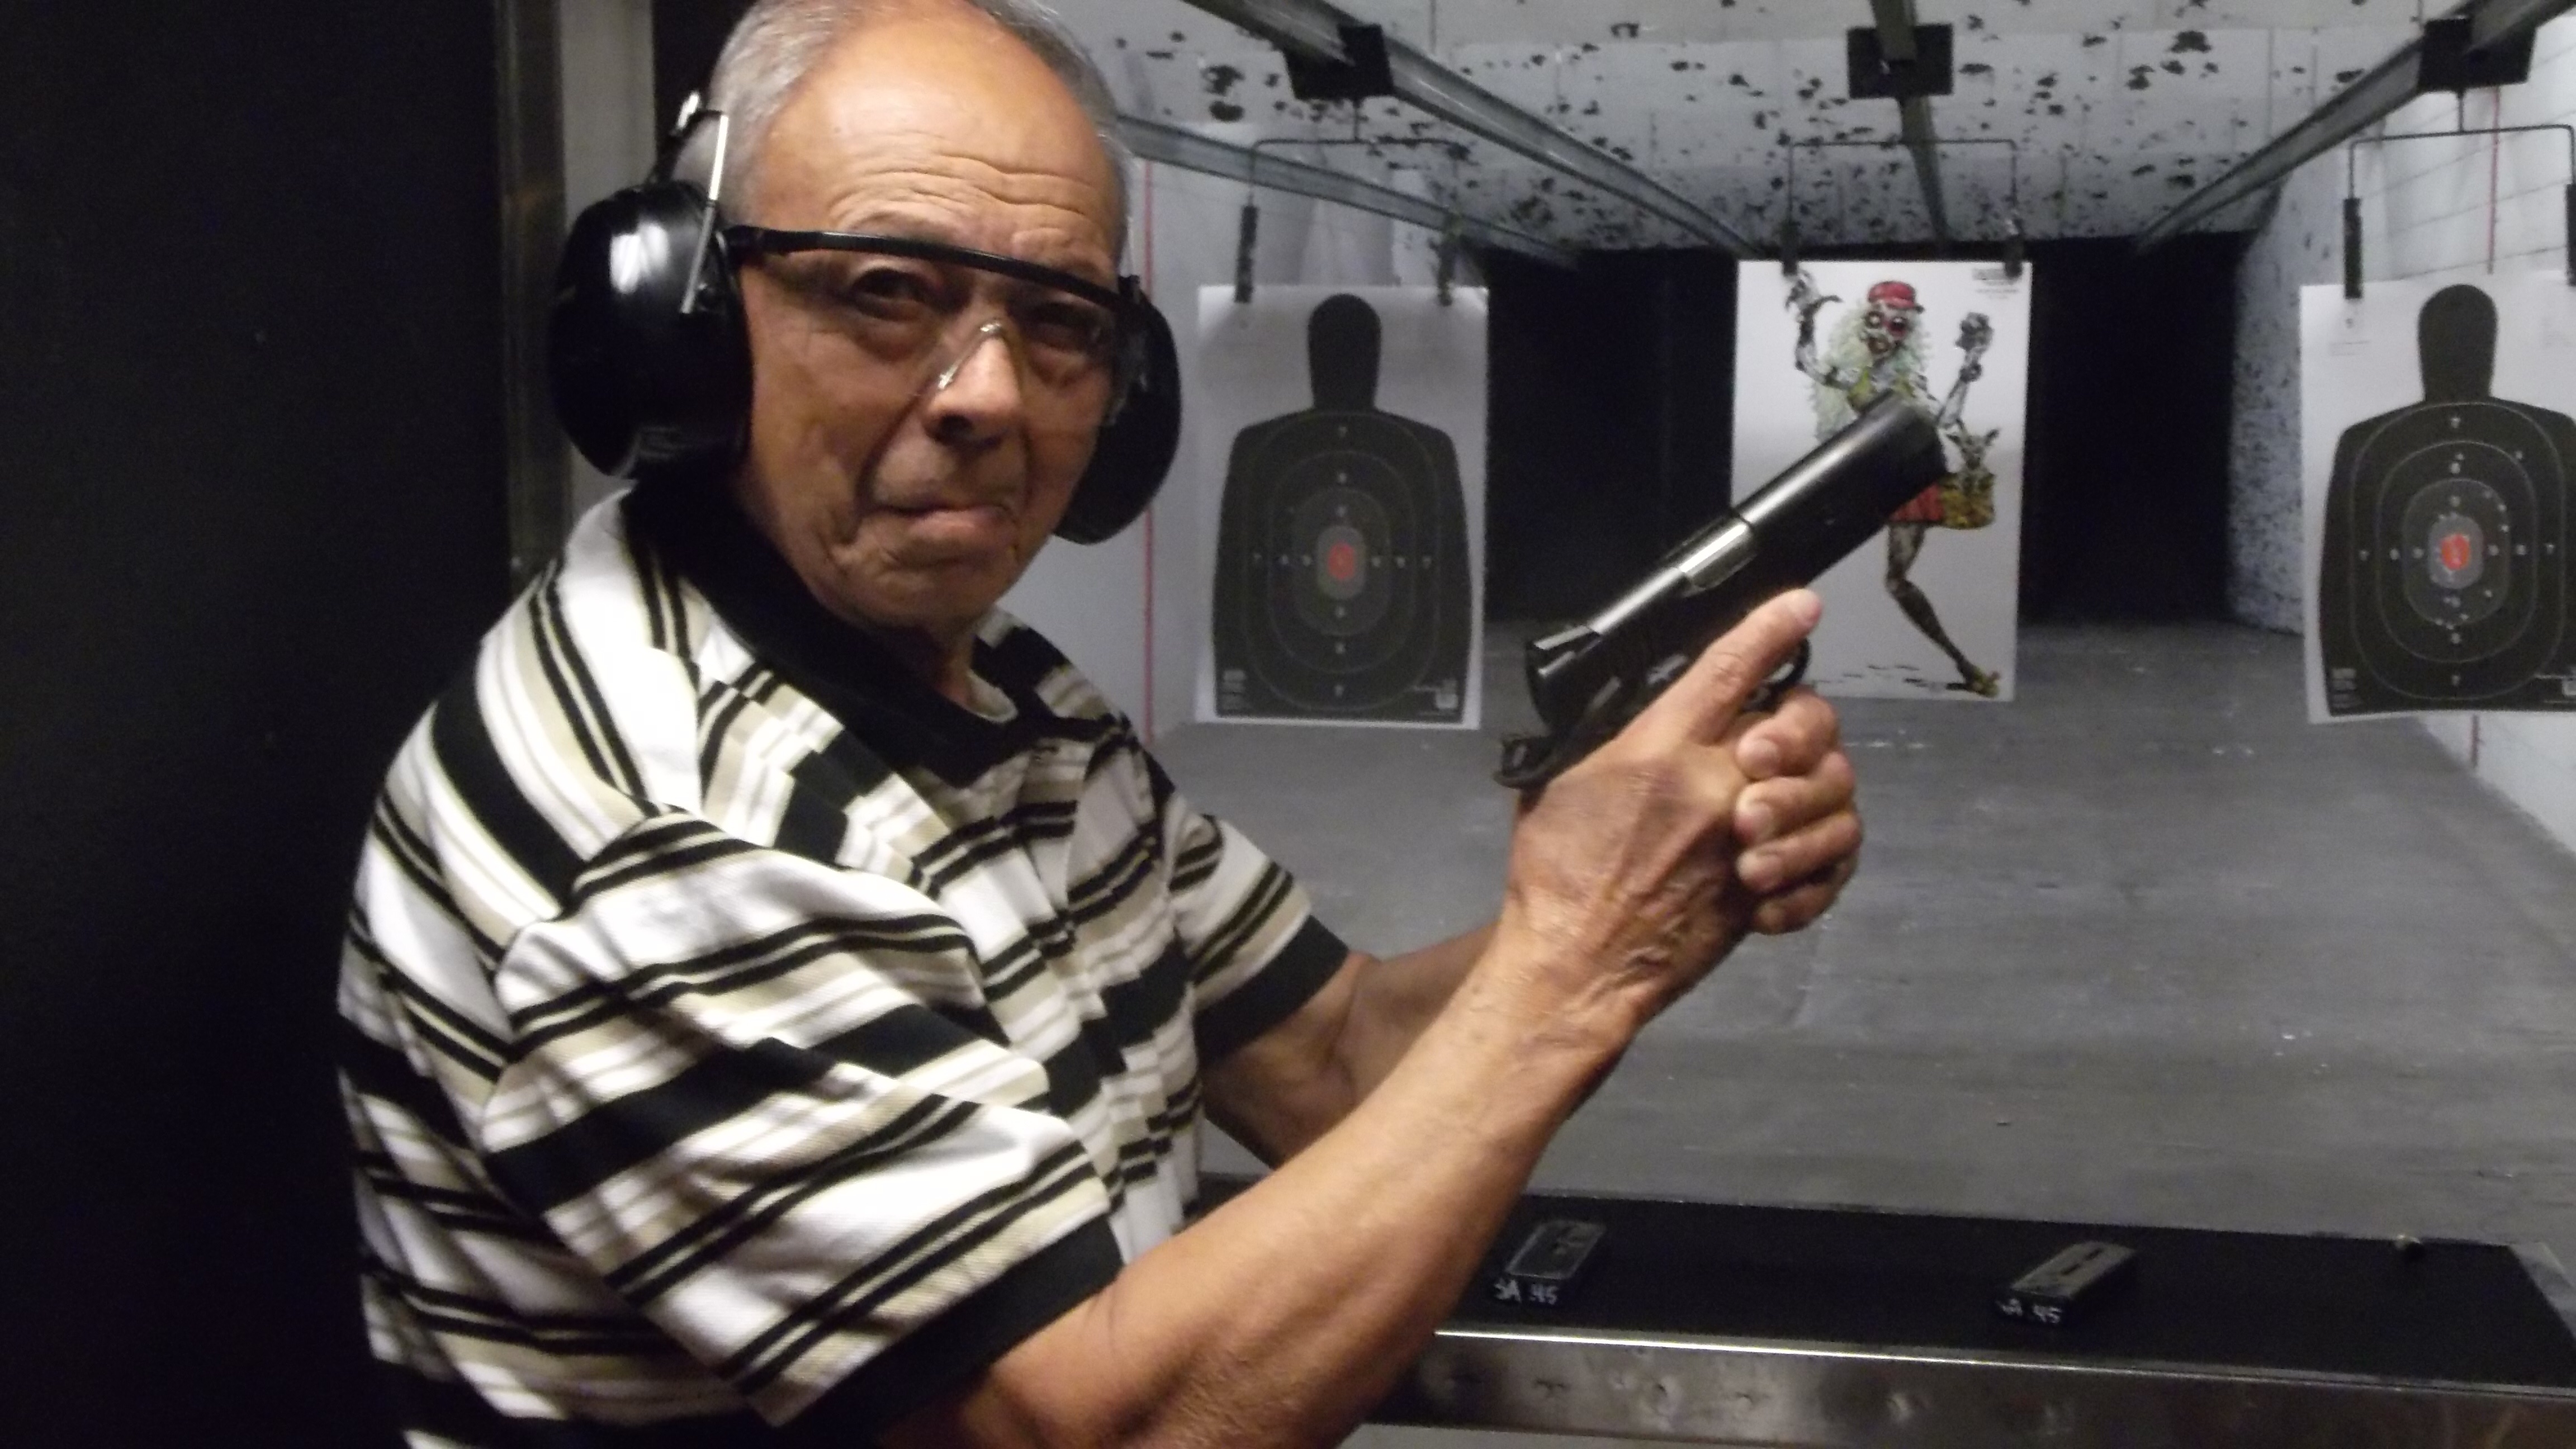 Shooting with my 79 year old father.